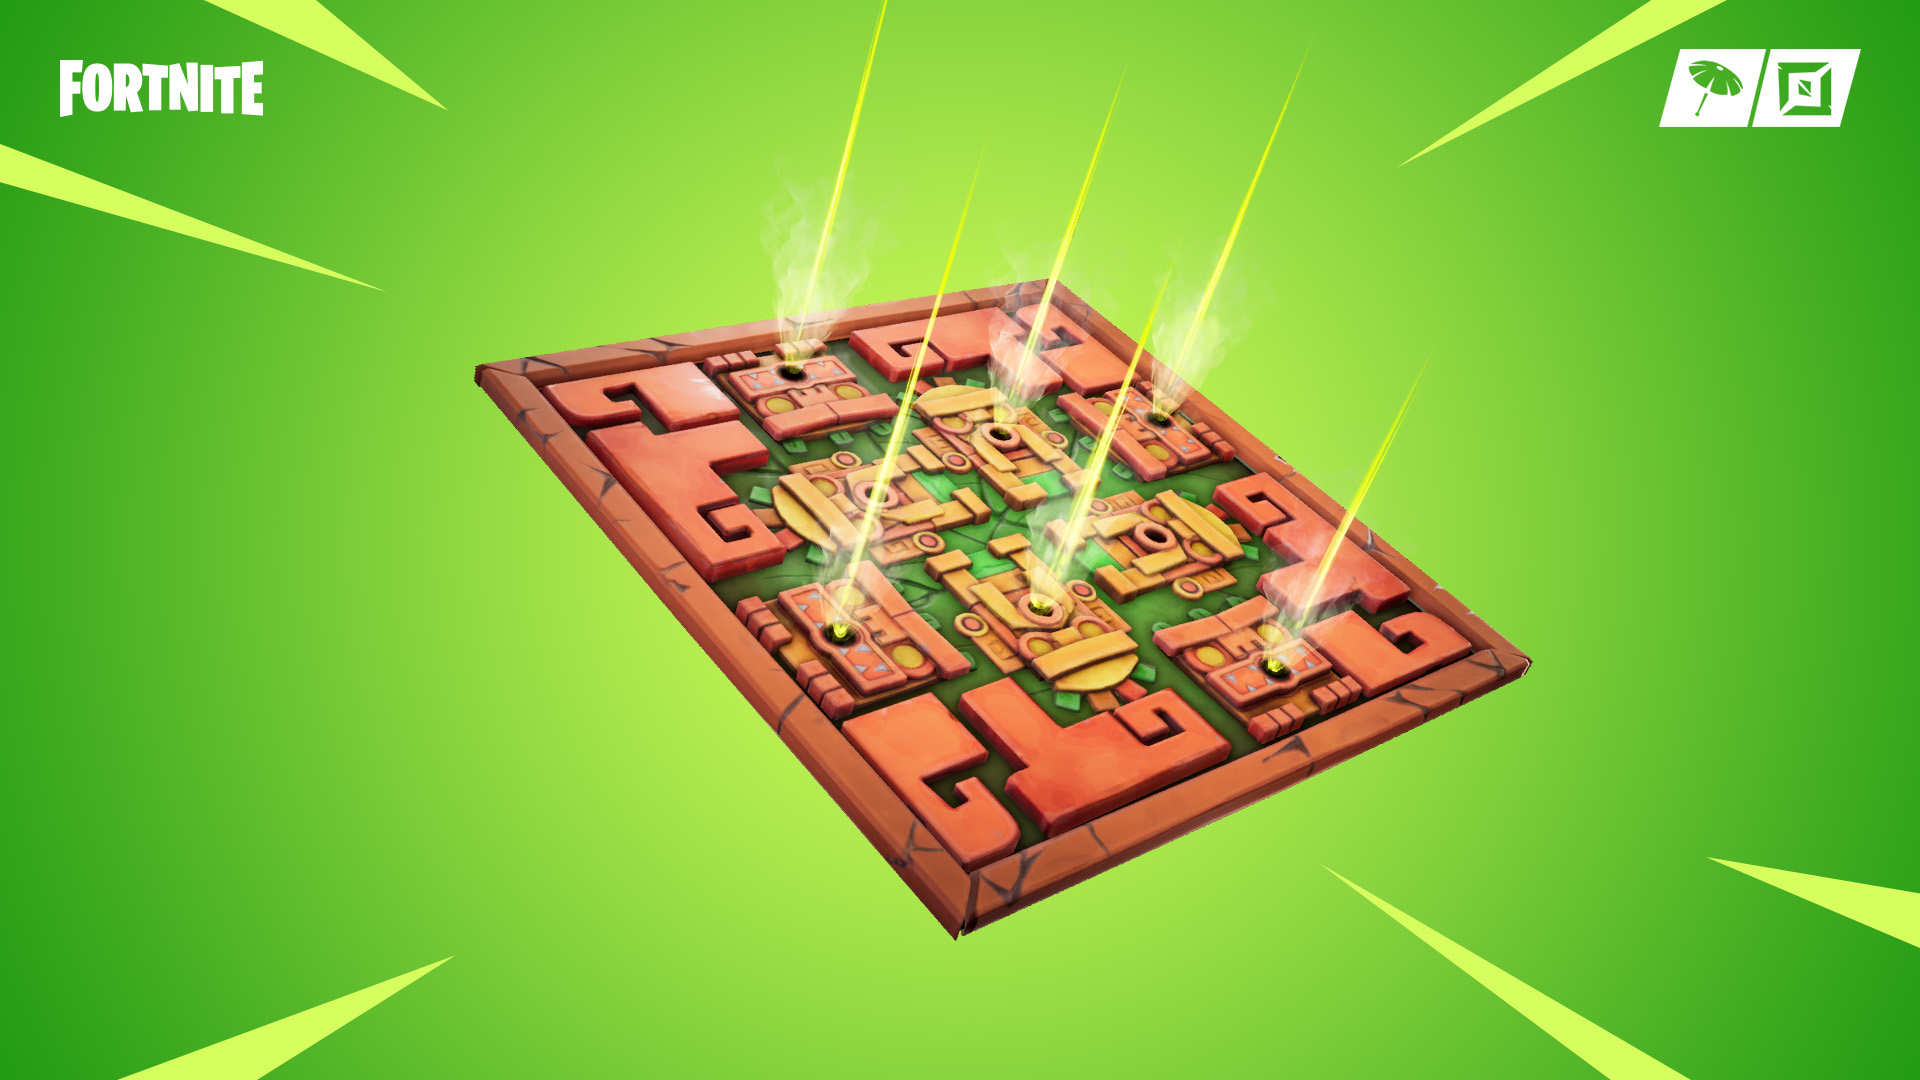 today patch 8 20 arrives across all platforms adding the floor is lava ltm the poison dart trap and new foraged items in addition to mobile fixes - fortnite mobile voice chat not working